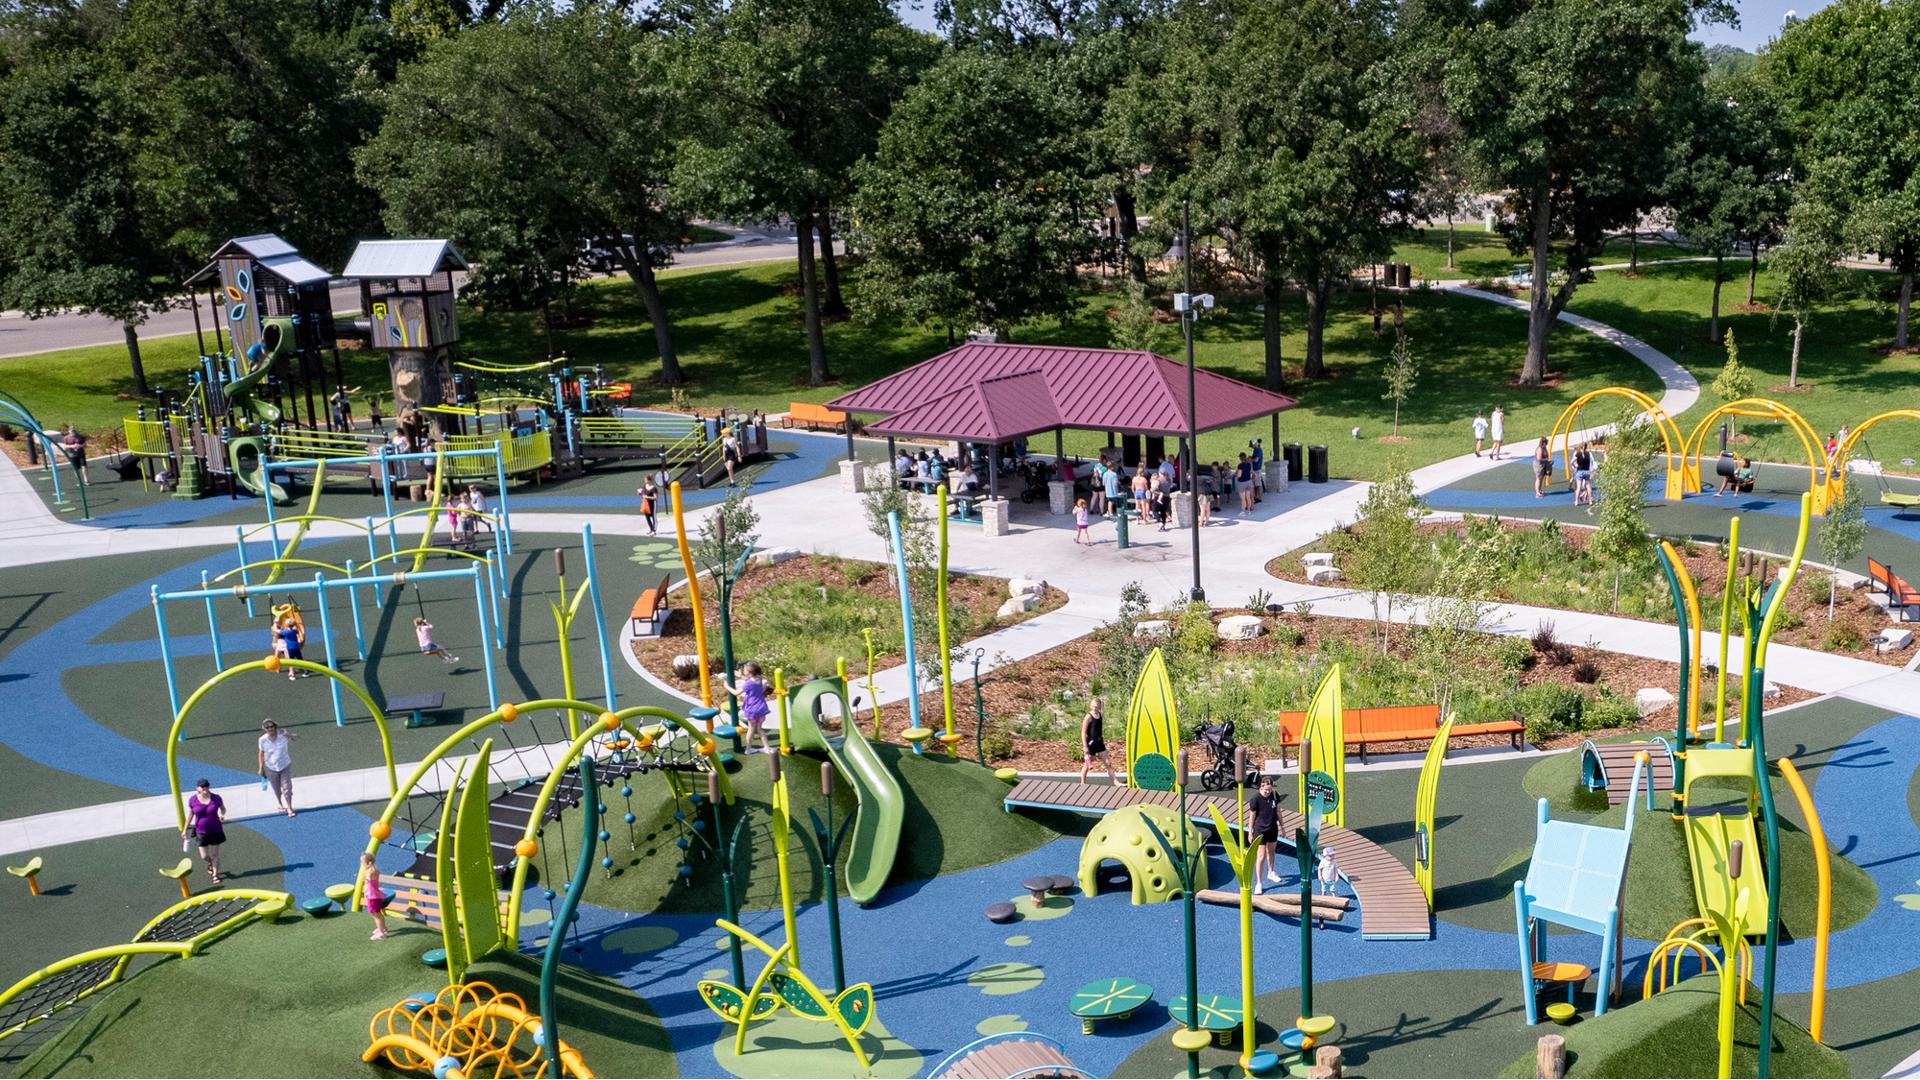 Elevated view of a large park play area with a nature inspired theme and a pavilion rest area with picnic tables.